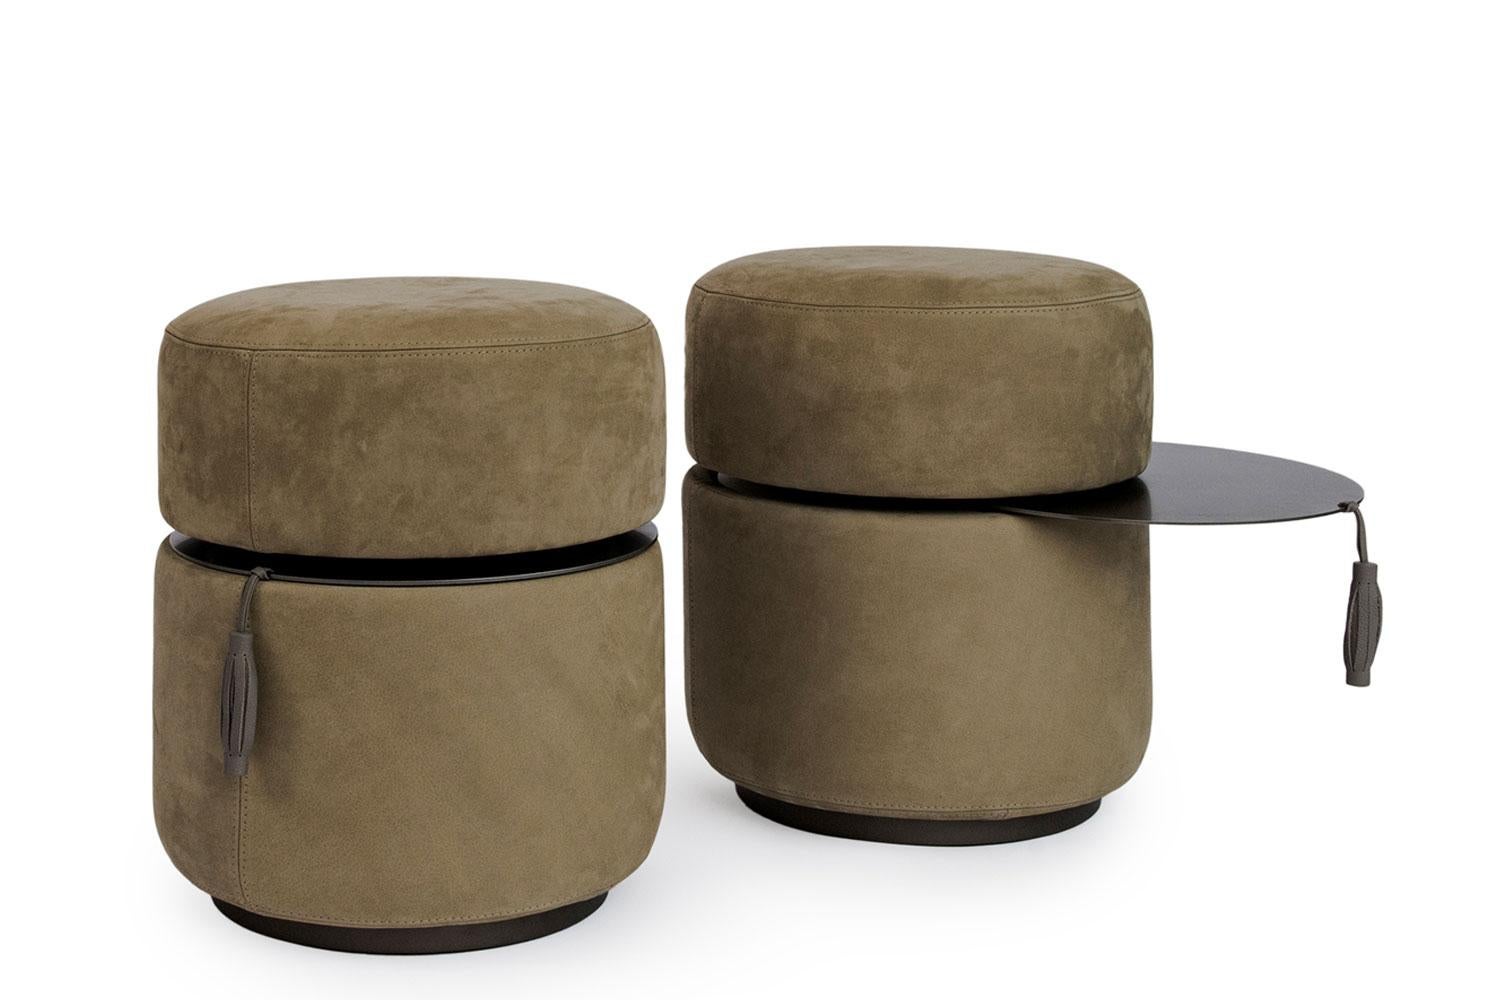 Giorgetti Otto Pouf Ottoman in Olive Nubuck Leather and Extractable Pewter Table In Excellent Condition For Sale In Tulsa, OK